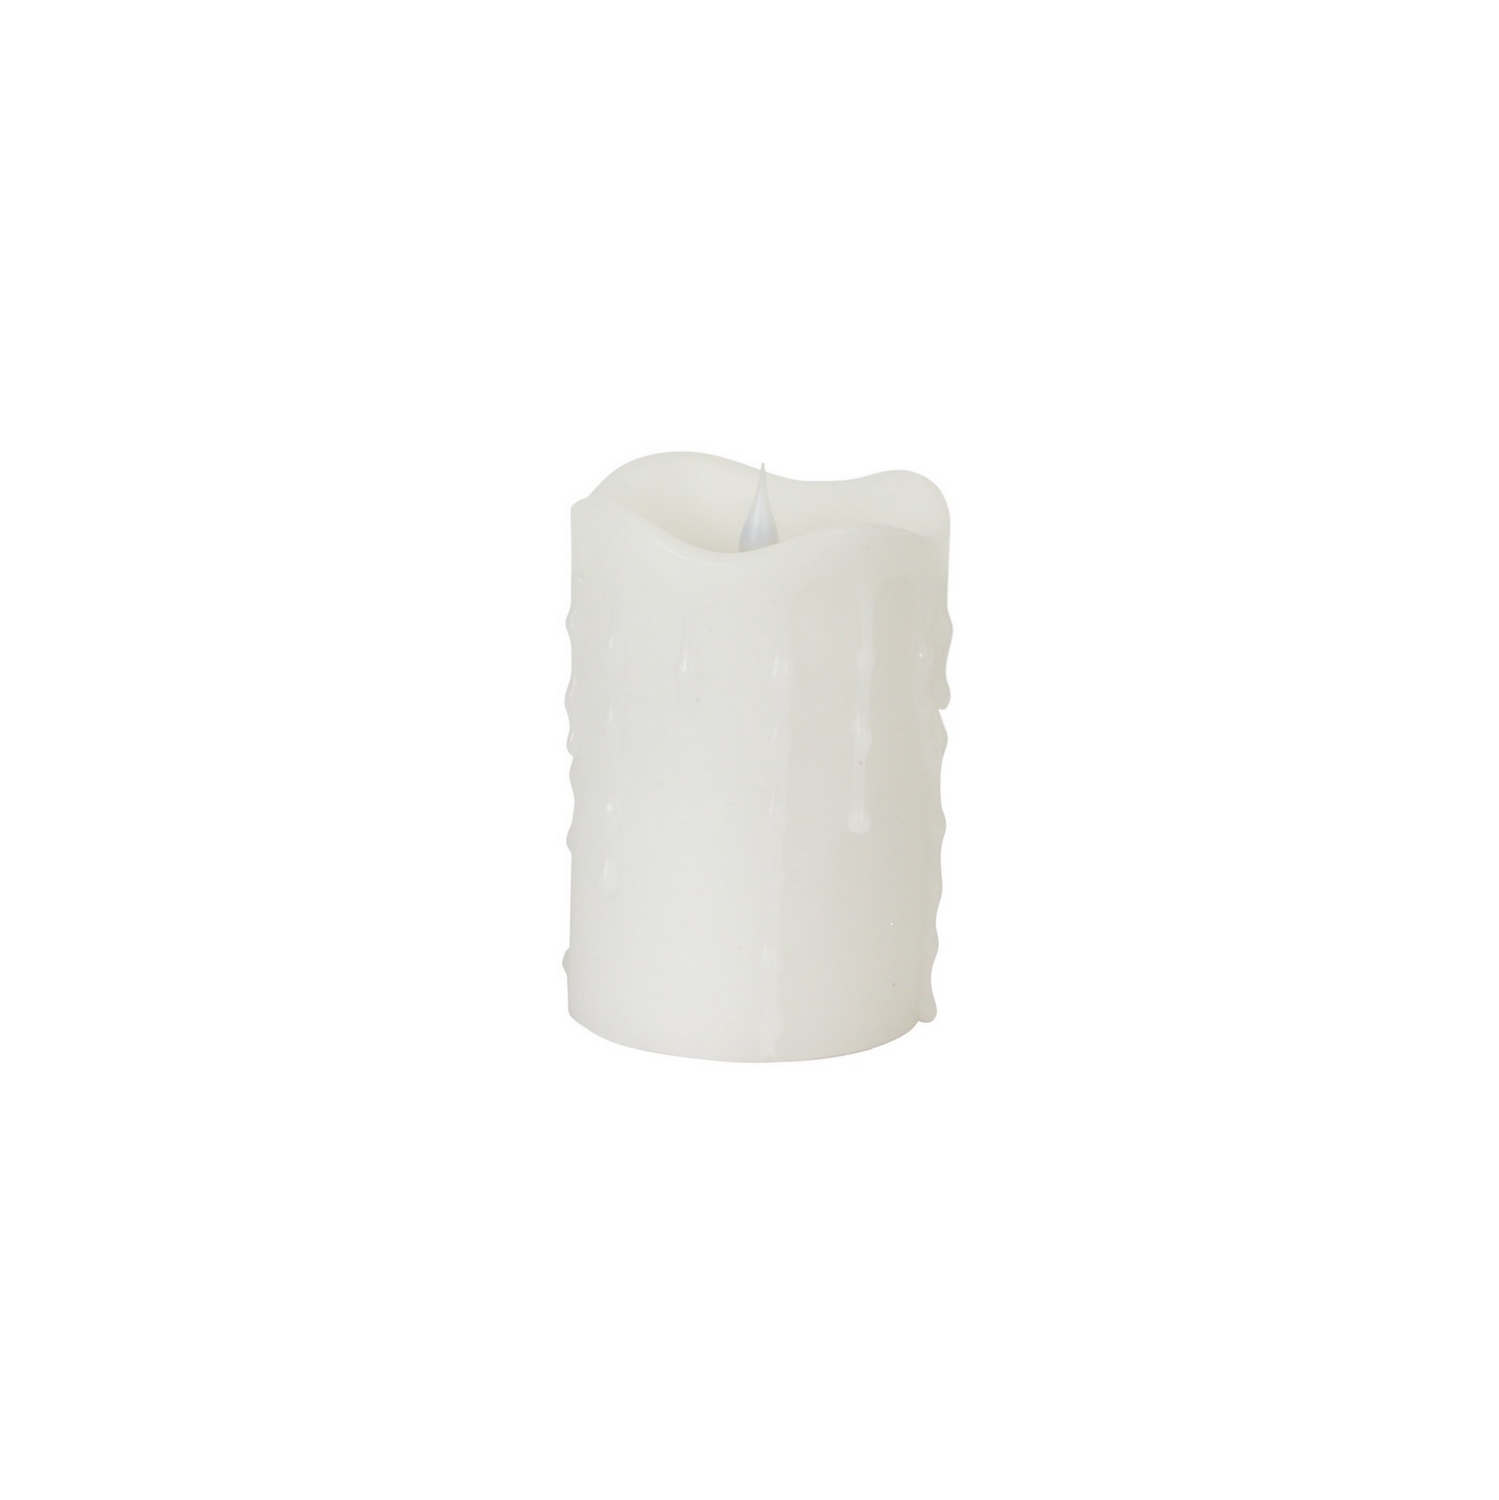 5.25" White Battery Operated Simplux Flameless LED Lighted Pillar Candle with Moving Flame